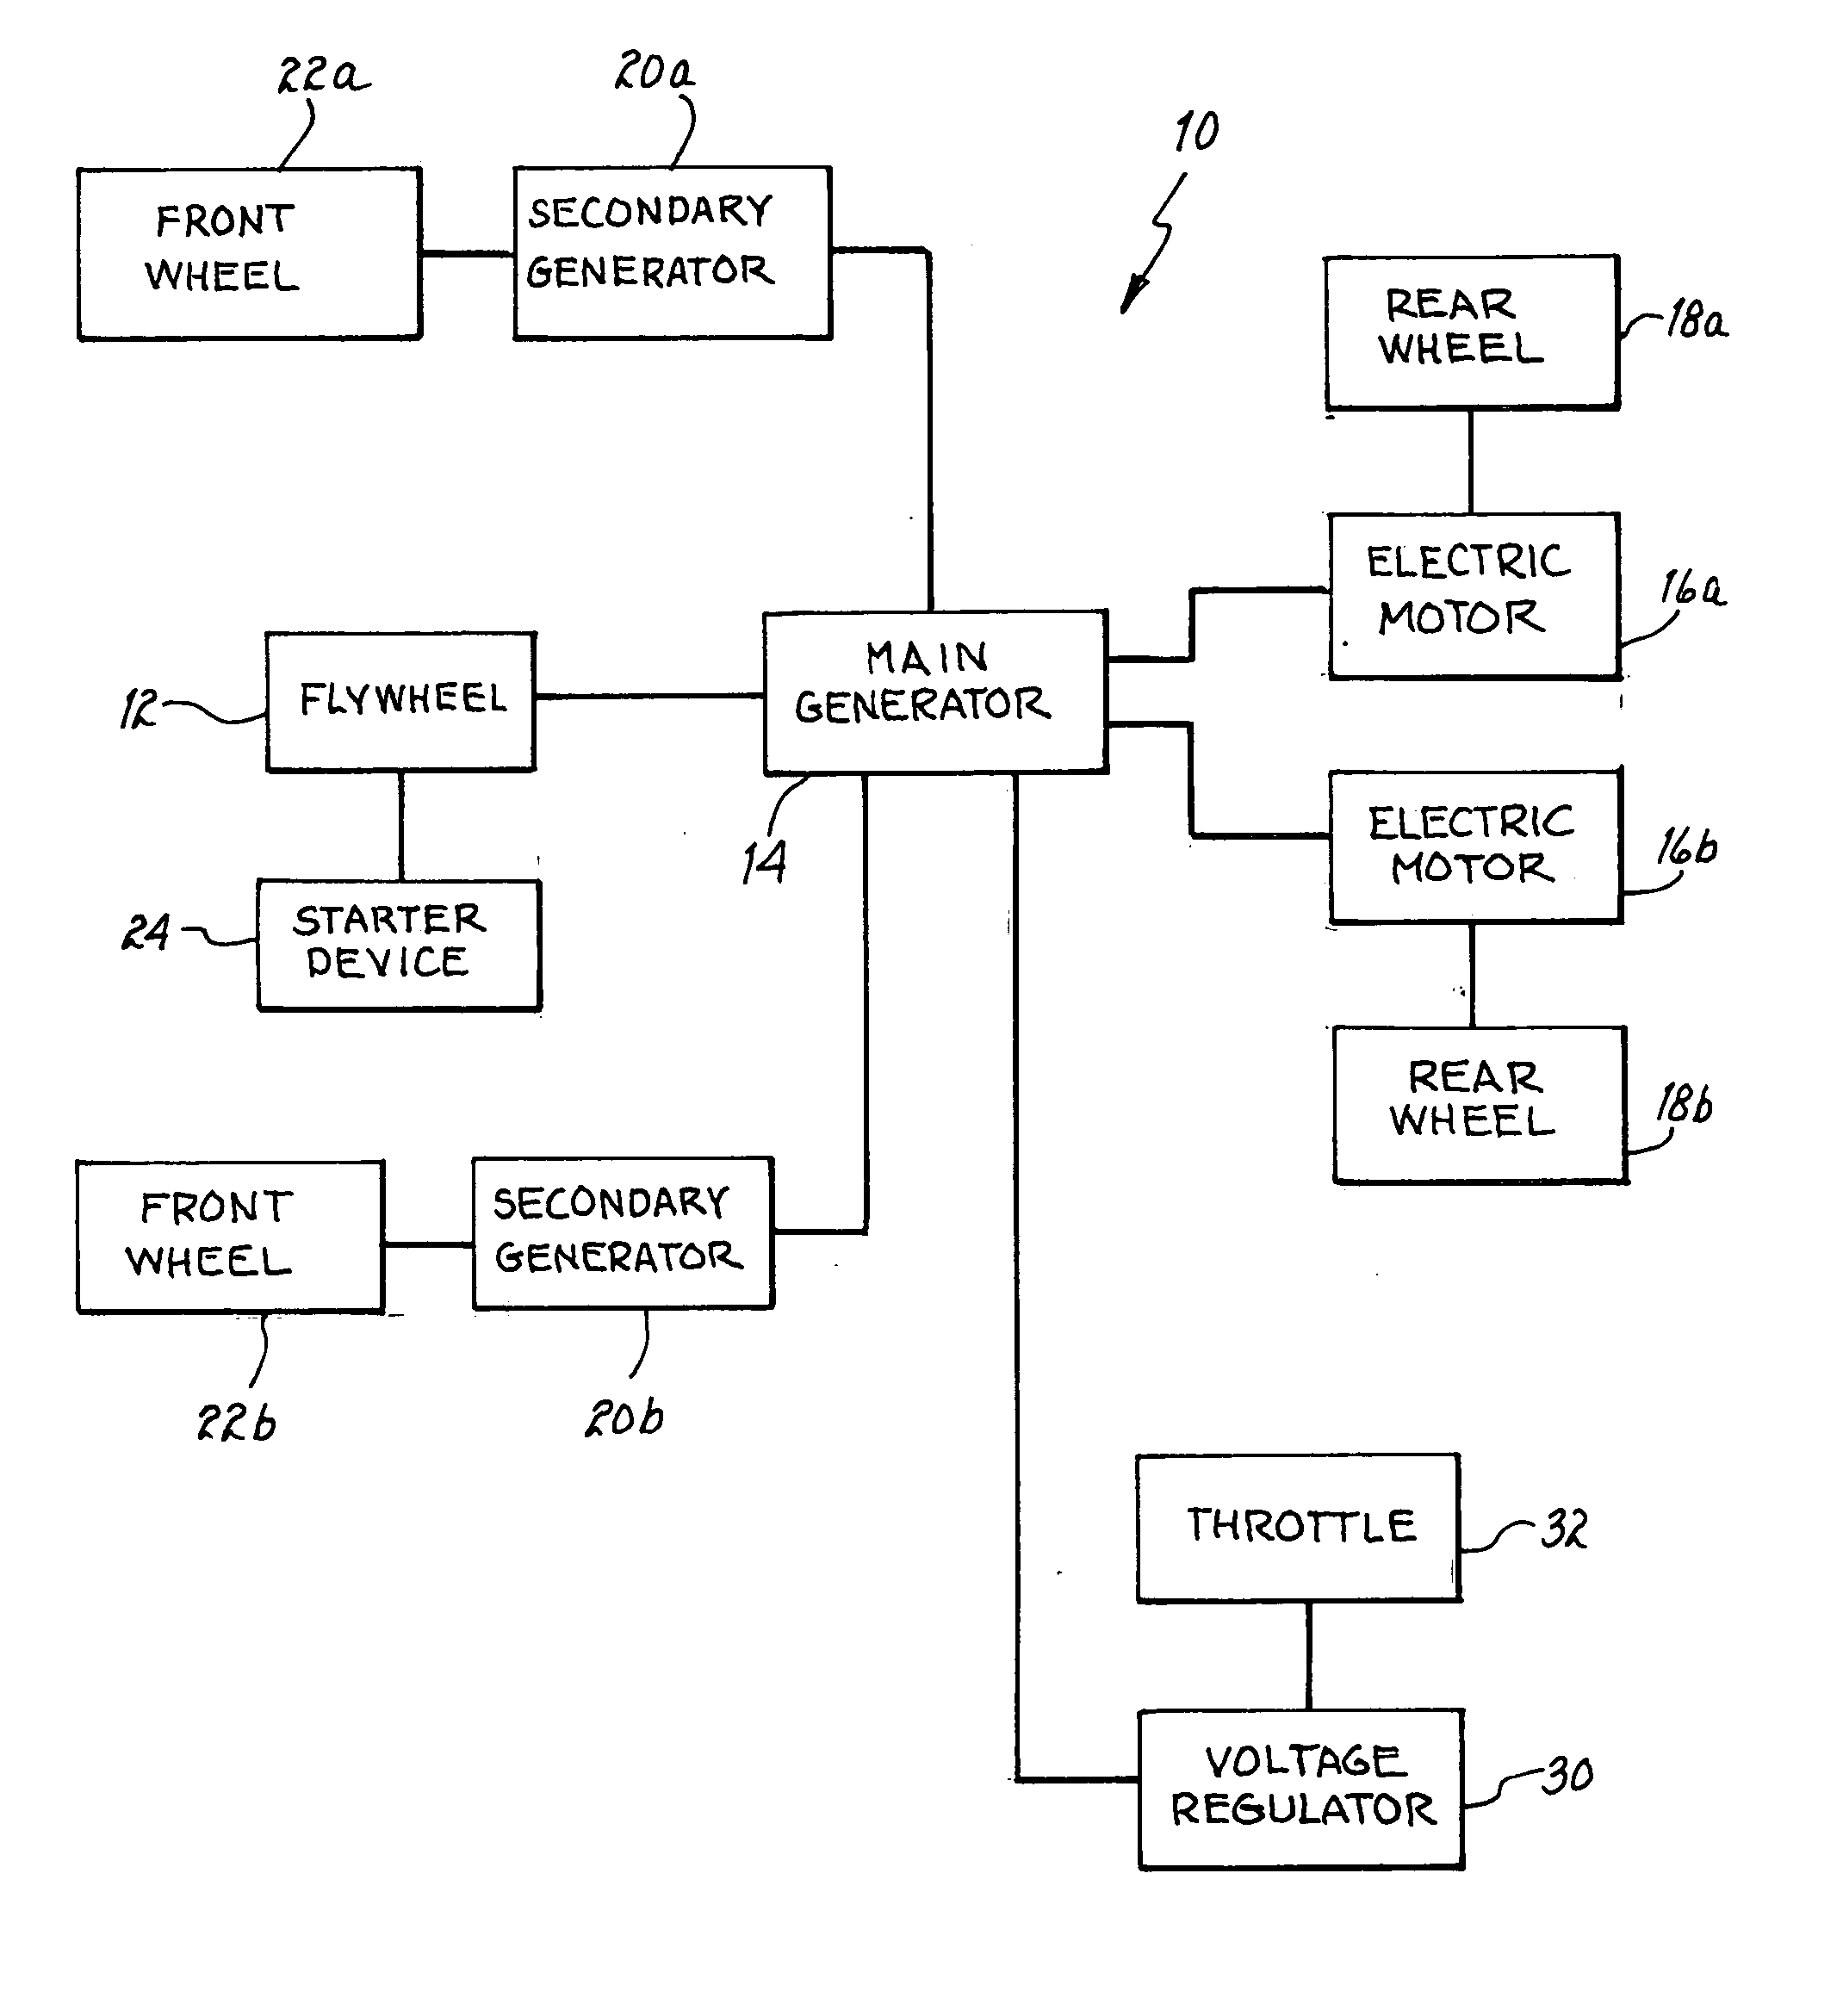 Flywheel drive system for a motor vehicle and method therefor